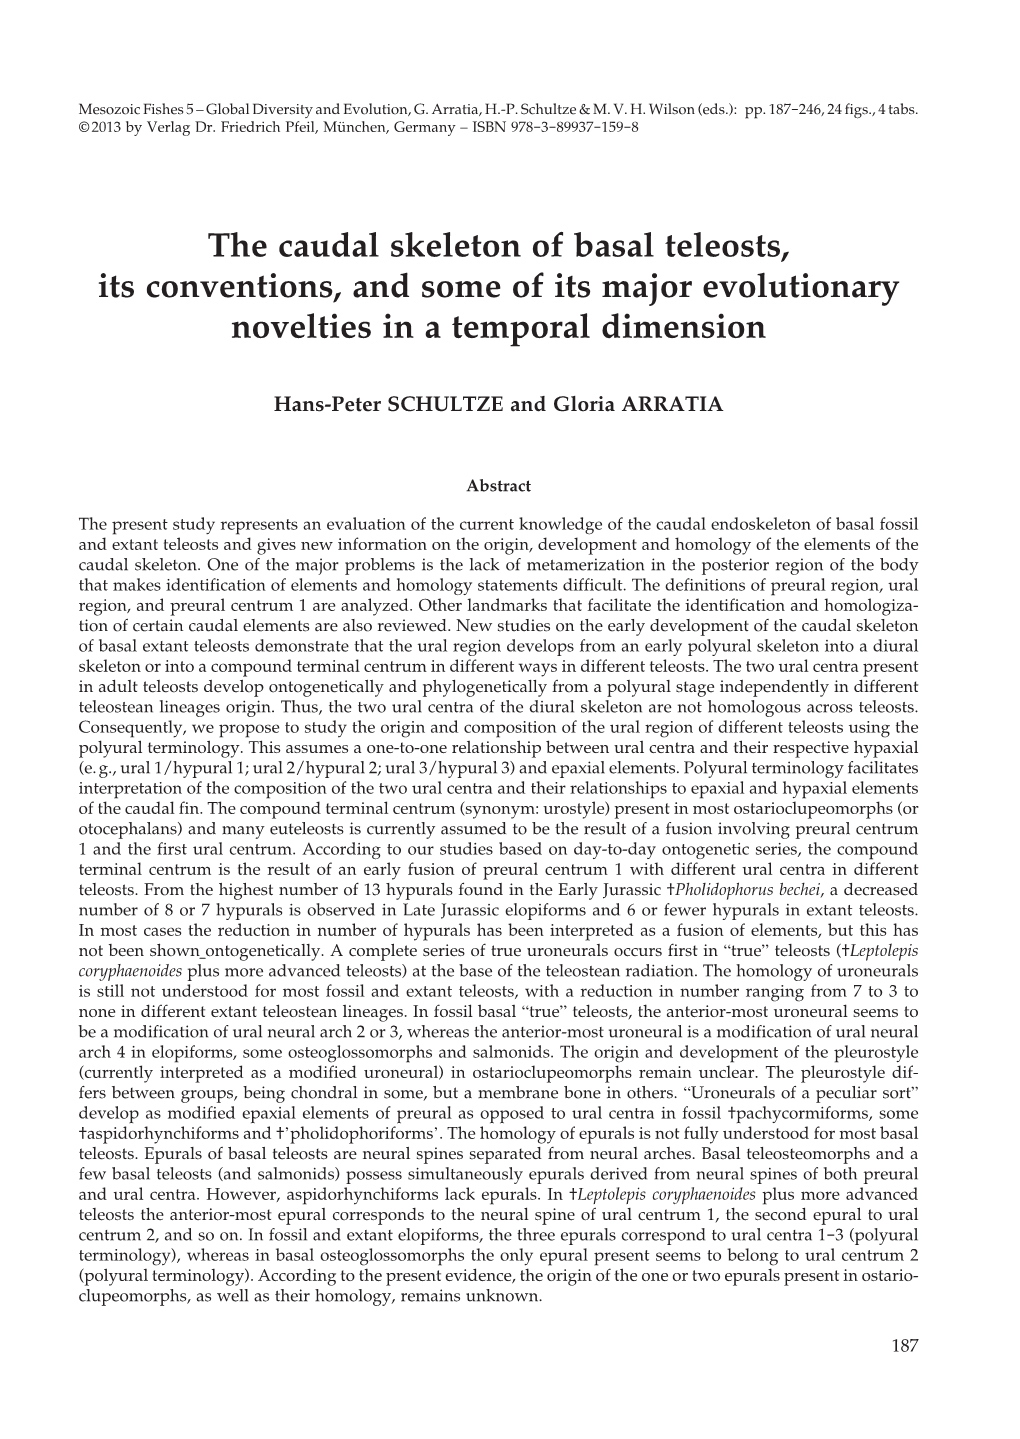 The Caudal Skeleton of Basal Teleosts, Its Conventions, and Some of Its Major Evolutionary Novelties in a Temporal Dimension